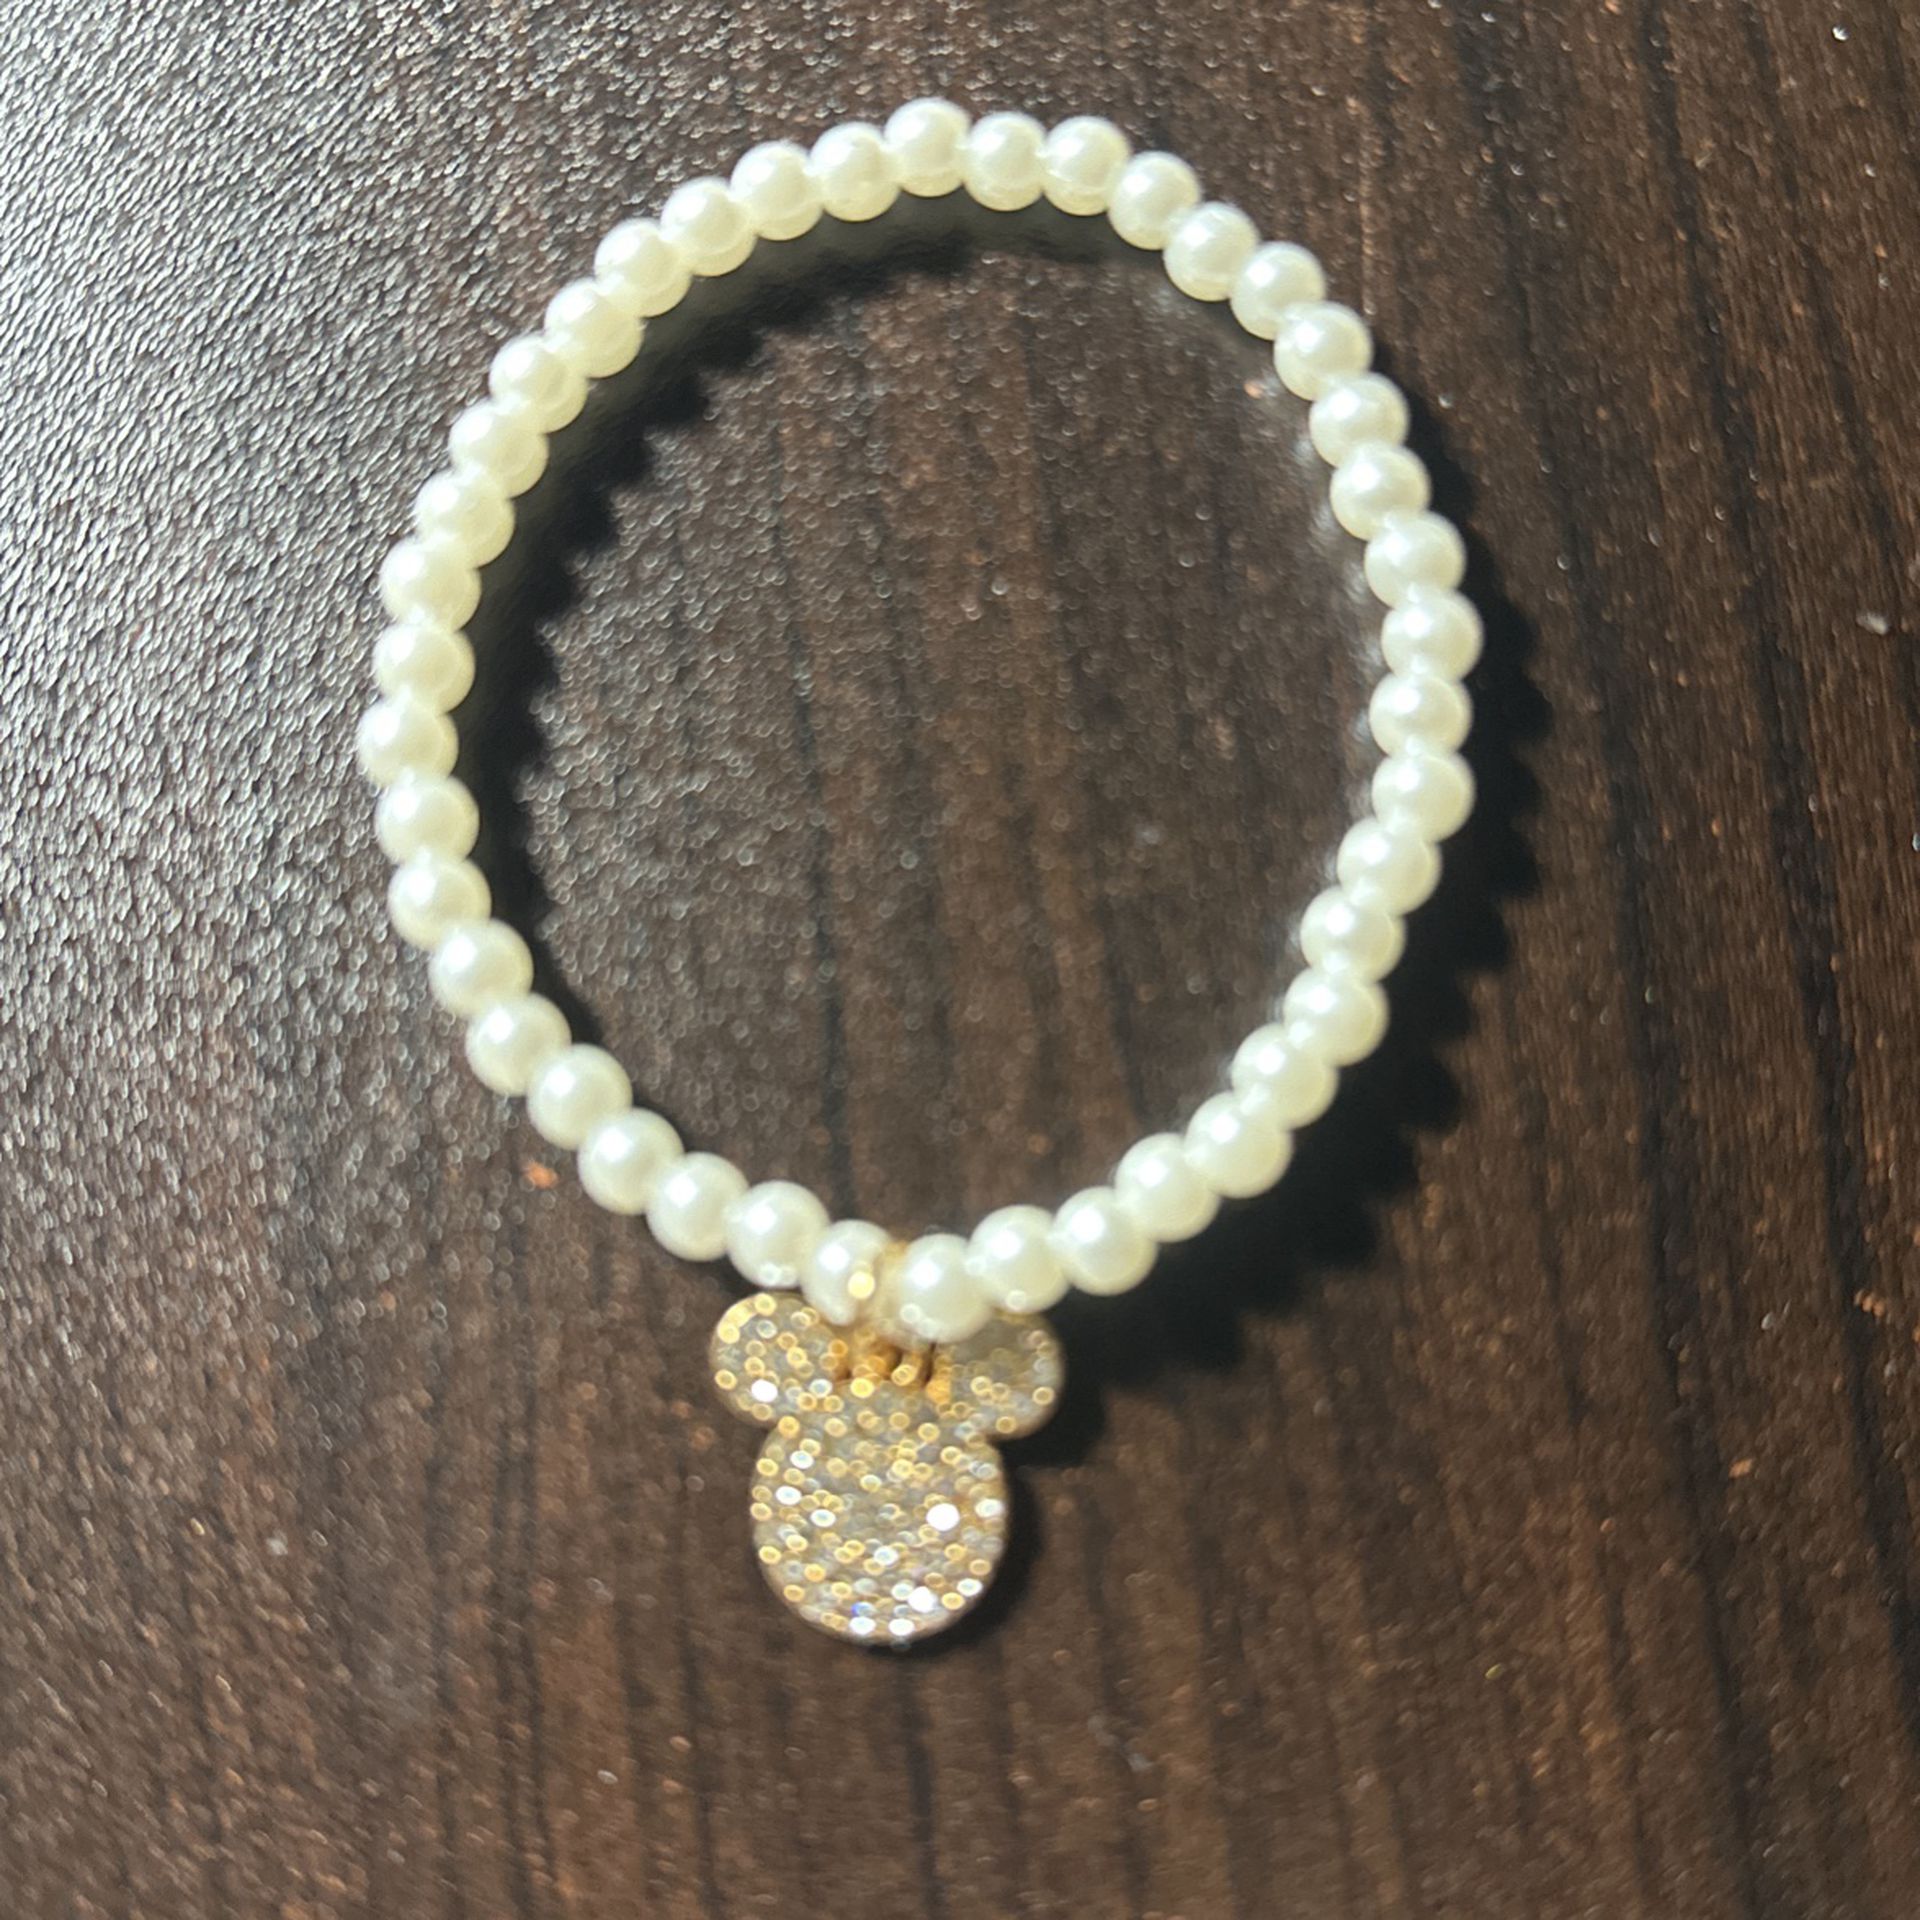 Pearl Bracelet With A Mickey Charm